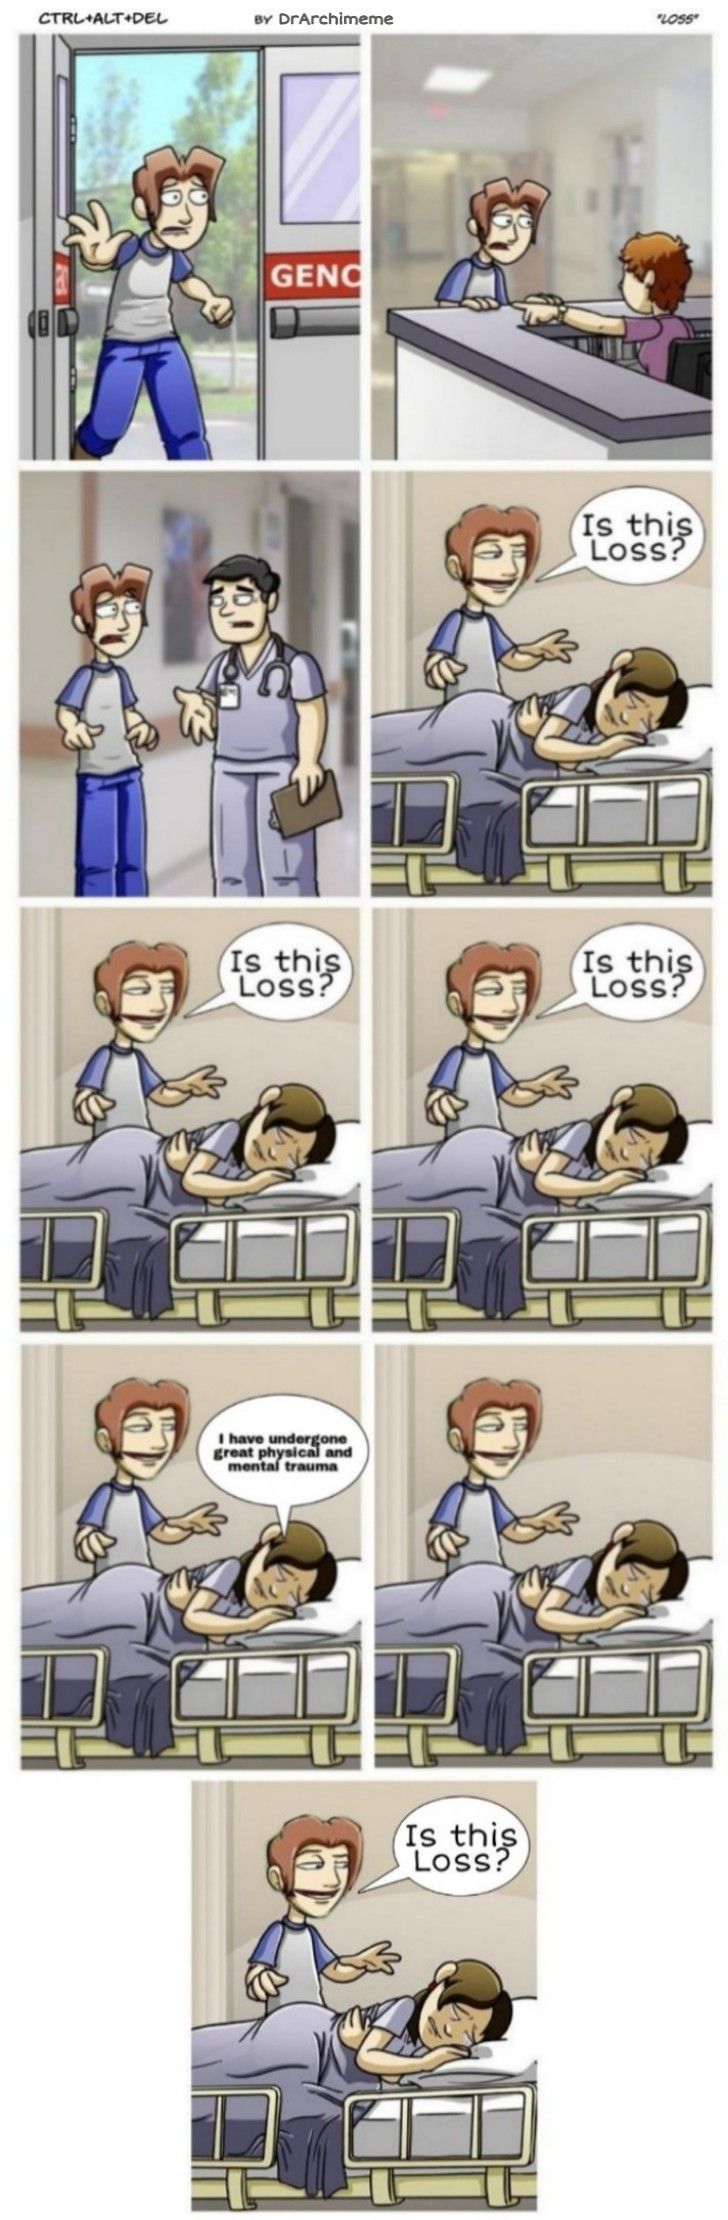 From Today's Meme Archives: "Loss" (est. 2008). Requested by jrlol3.